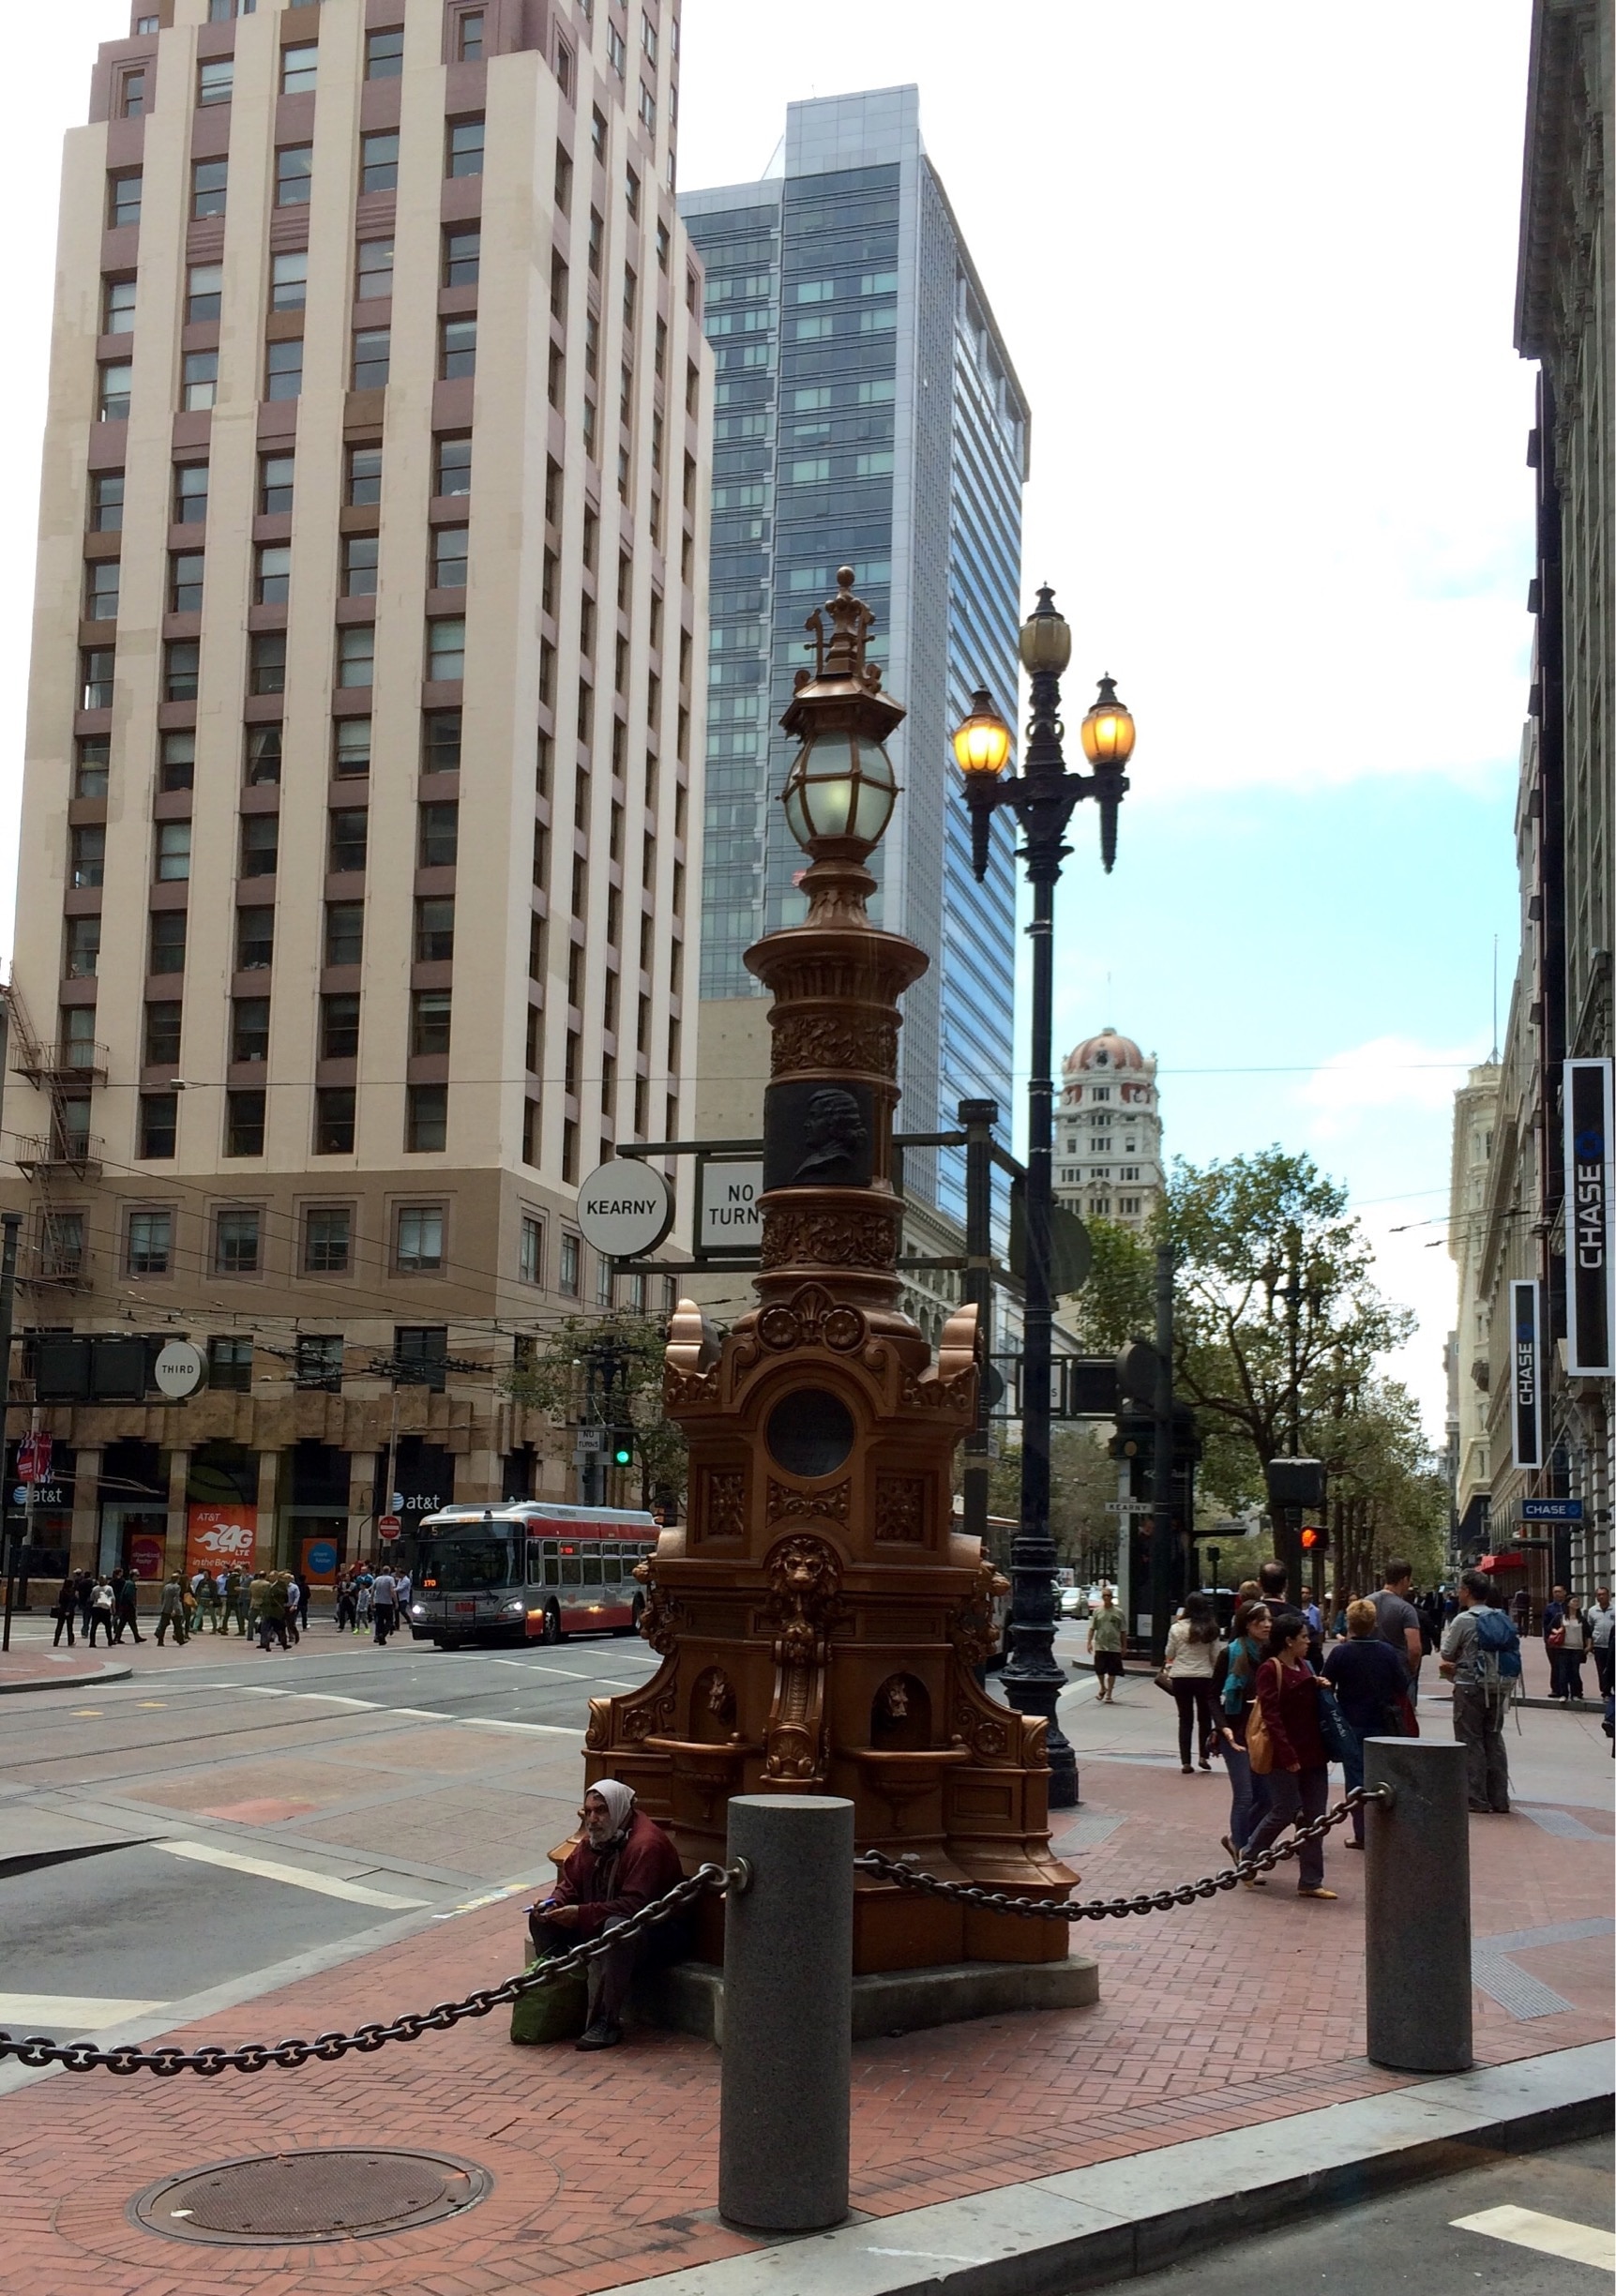 Historical fountain located at the intersection of Market Street, where Geary and Kearny Streets connect in downtown San Francisco, California.
   The oldest surviving monument in San Francisco. After an earthquake in 1906, the fountain, which was one of the few remaining structures on Market Street, became a central meeting place for the people in San Francisco. 
  It's interesting to learn new things when traveling. 
